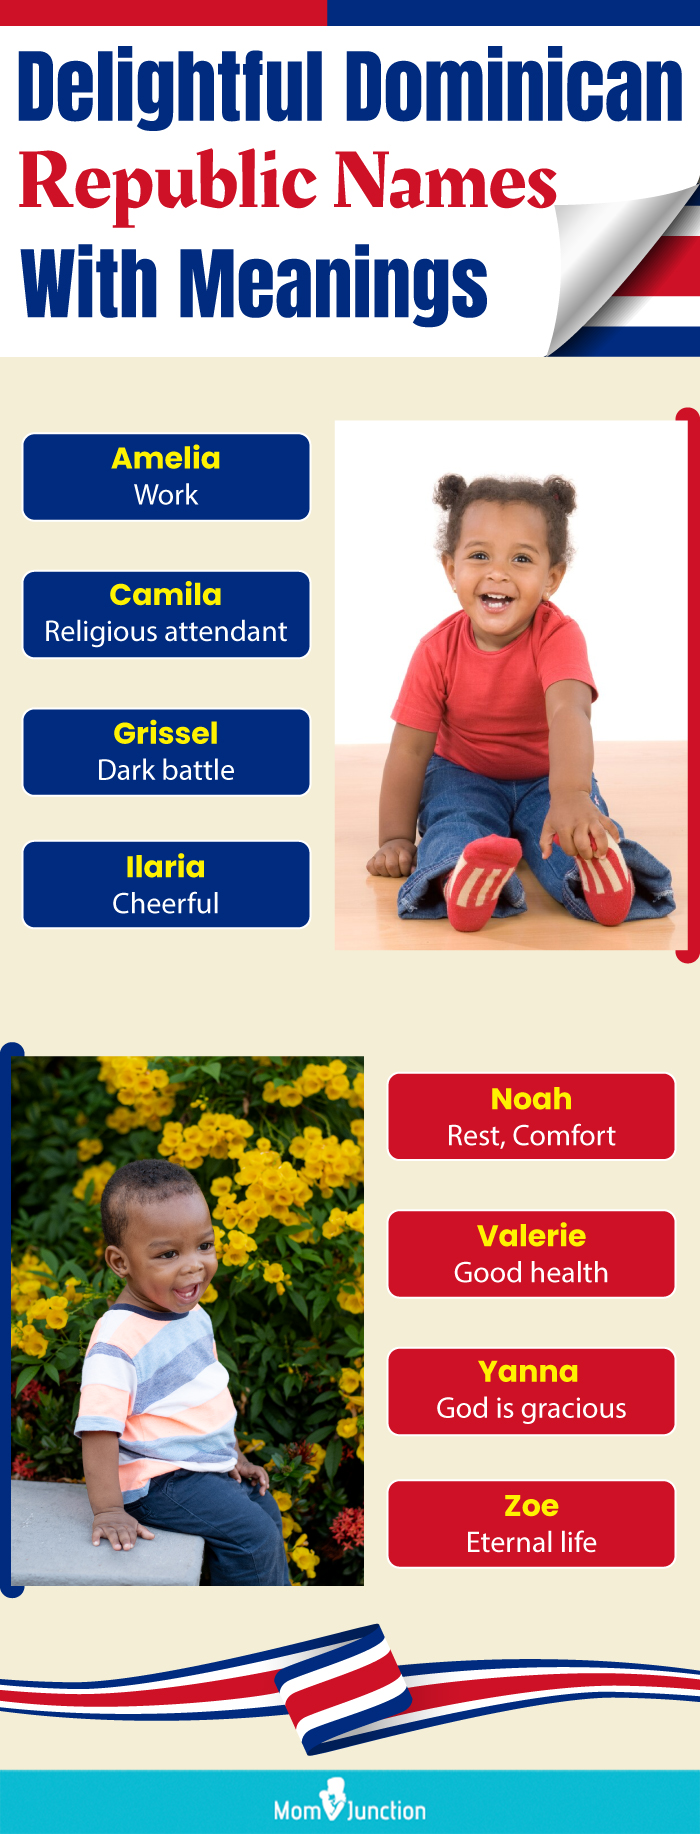 delightful dominican republic names with meanings (infographic)